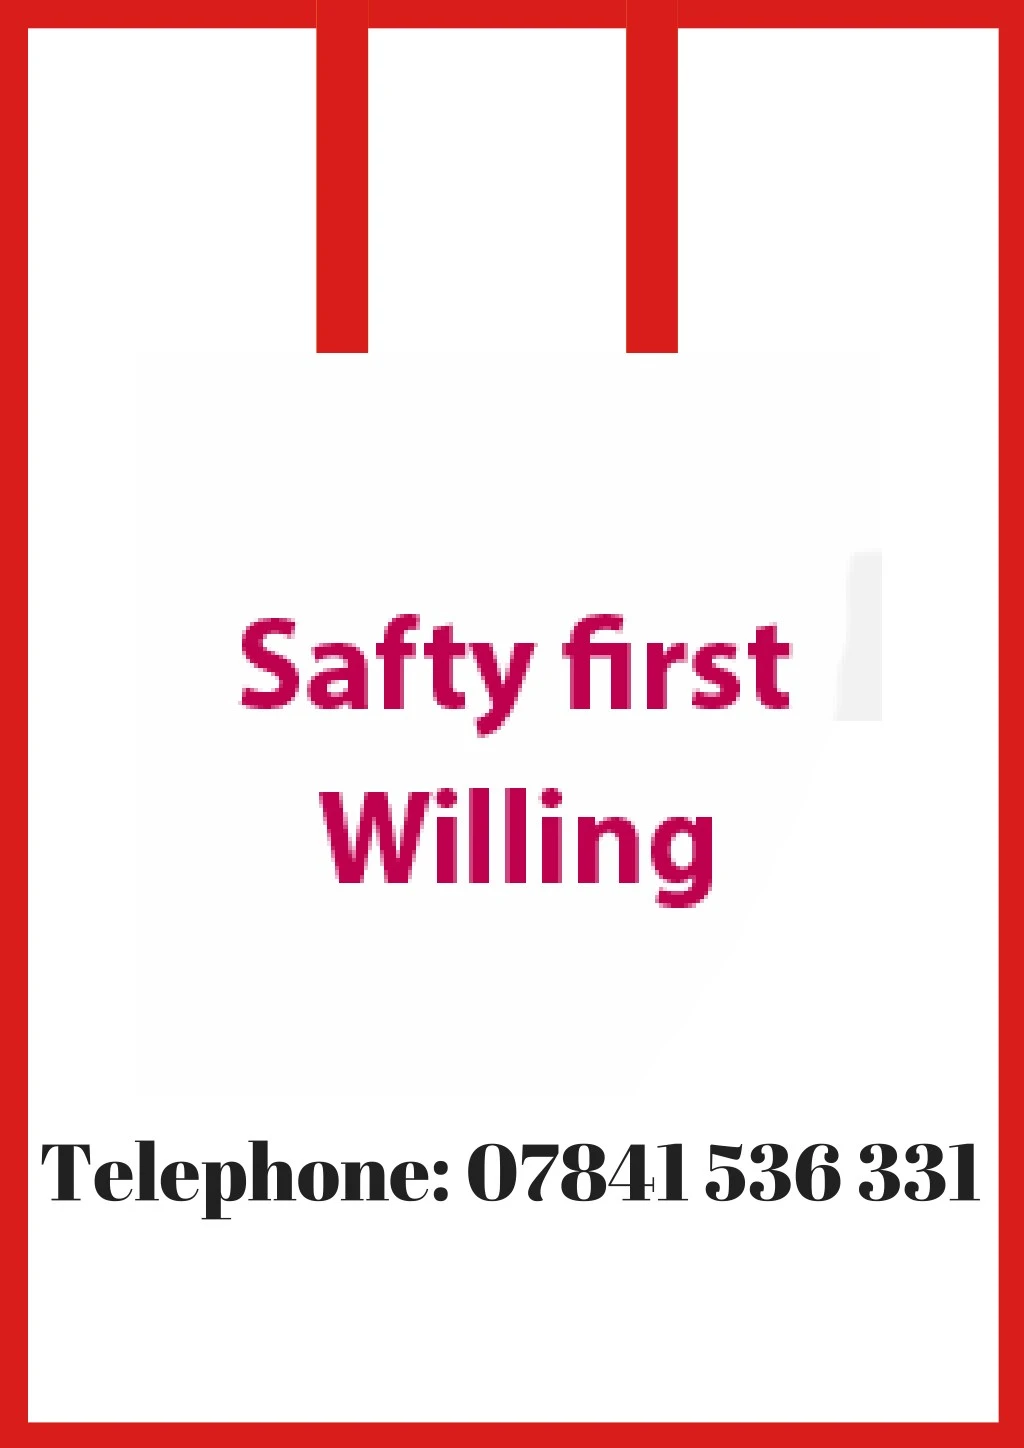 saftey first welling telephone 07841 536 331